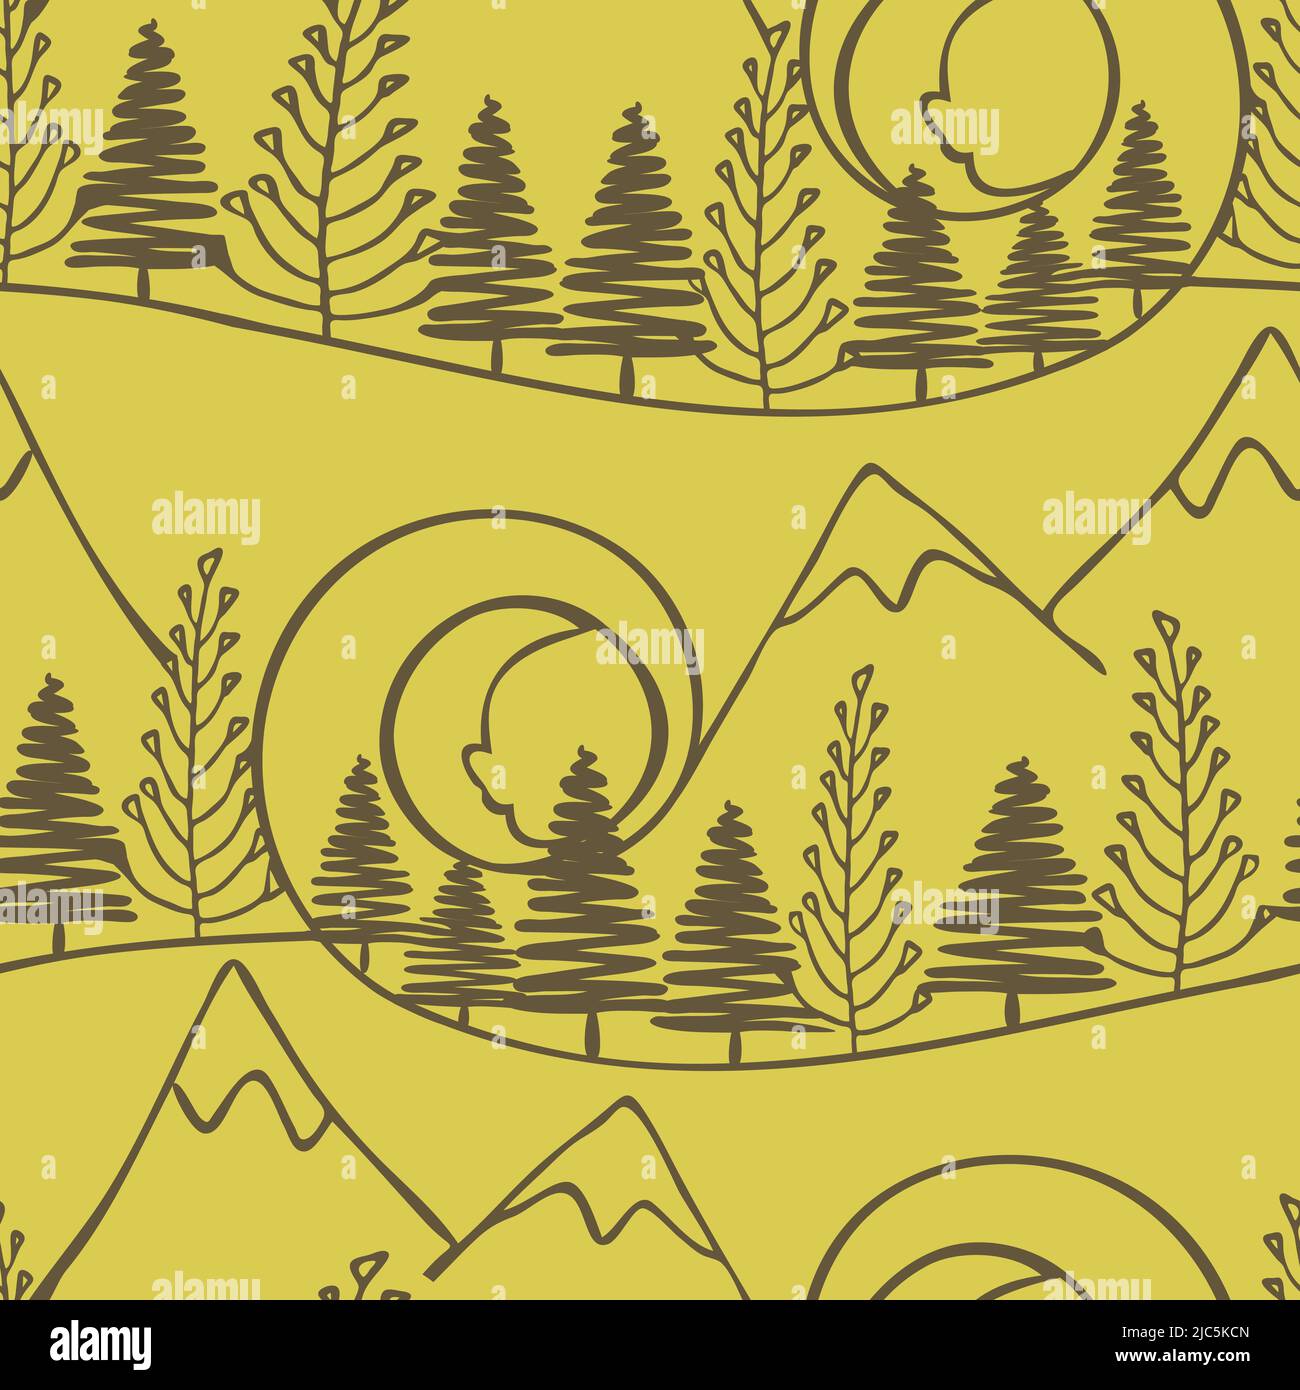 Seamless vector pattern with forest landscape on yellow background. Simple outdoors line art wallpaper design. Stock Vector